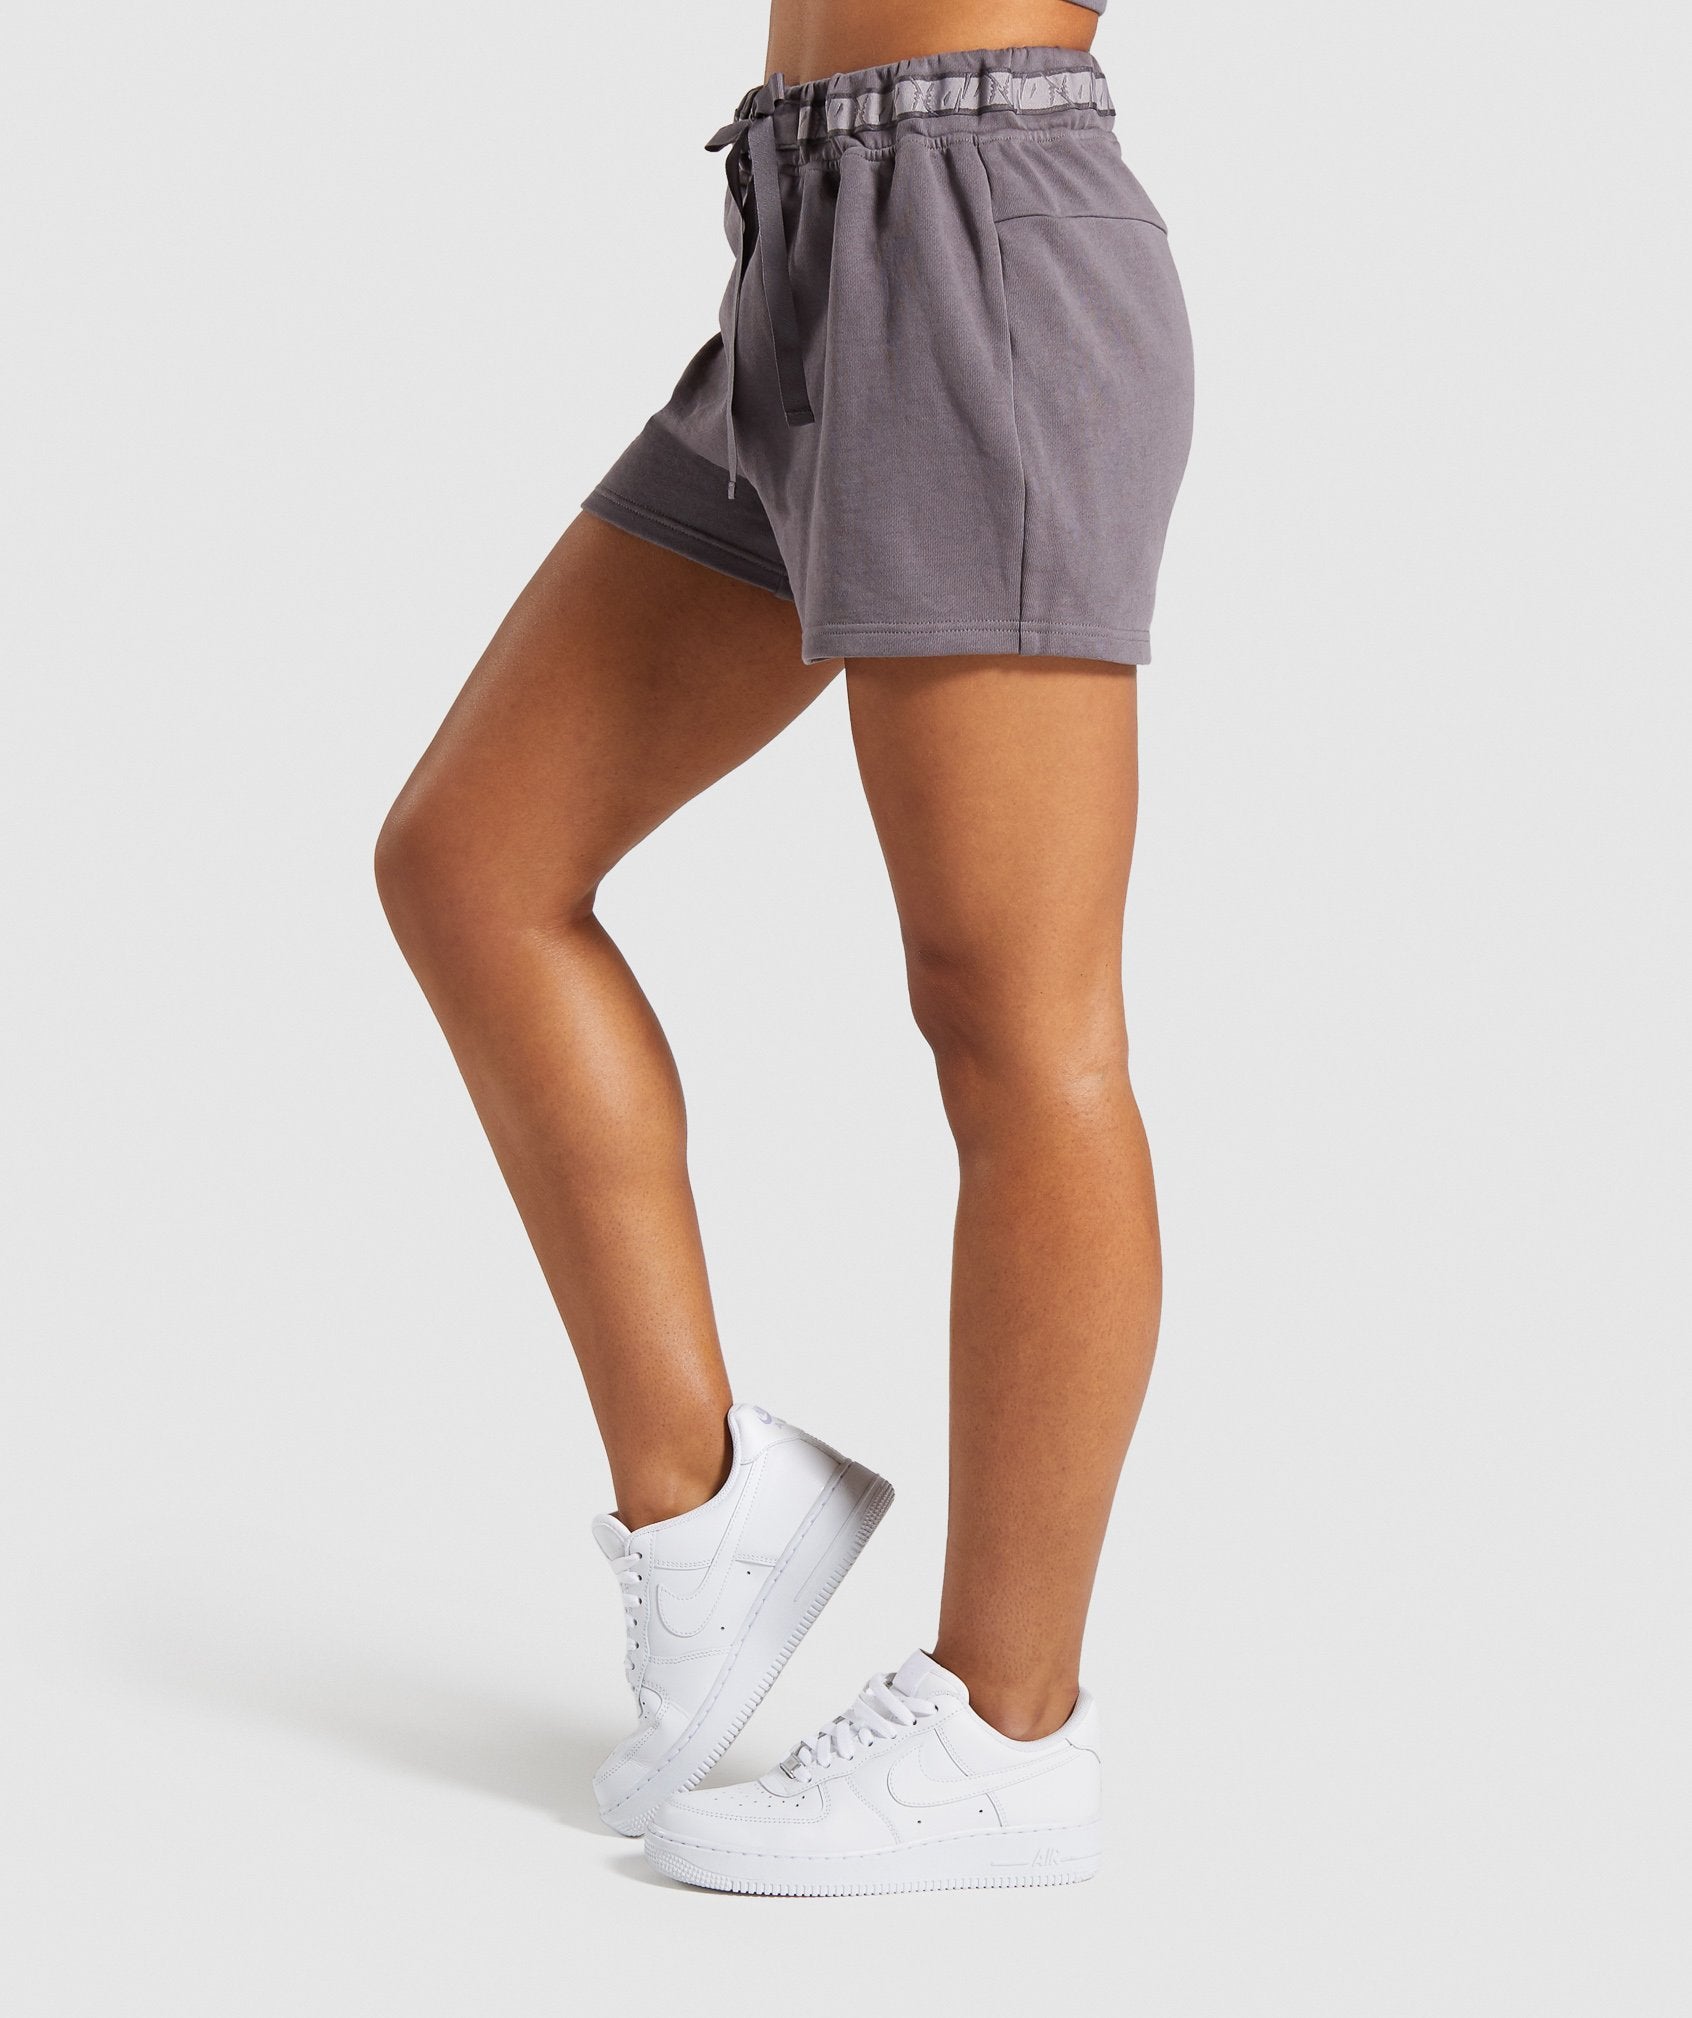 24/7 Shorts in Slate Lavender - view 3